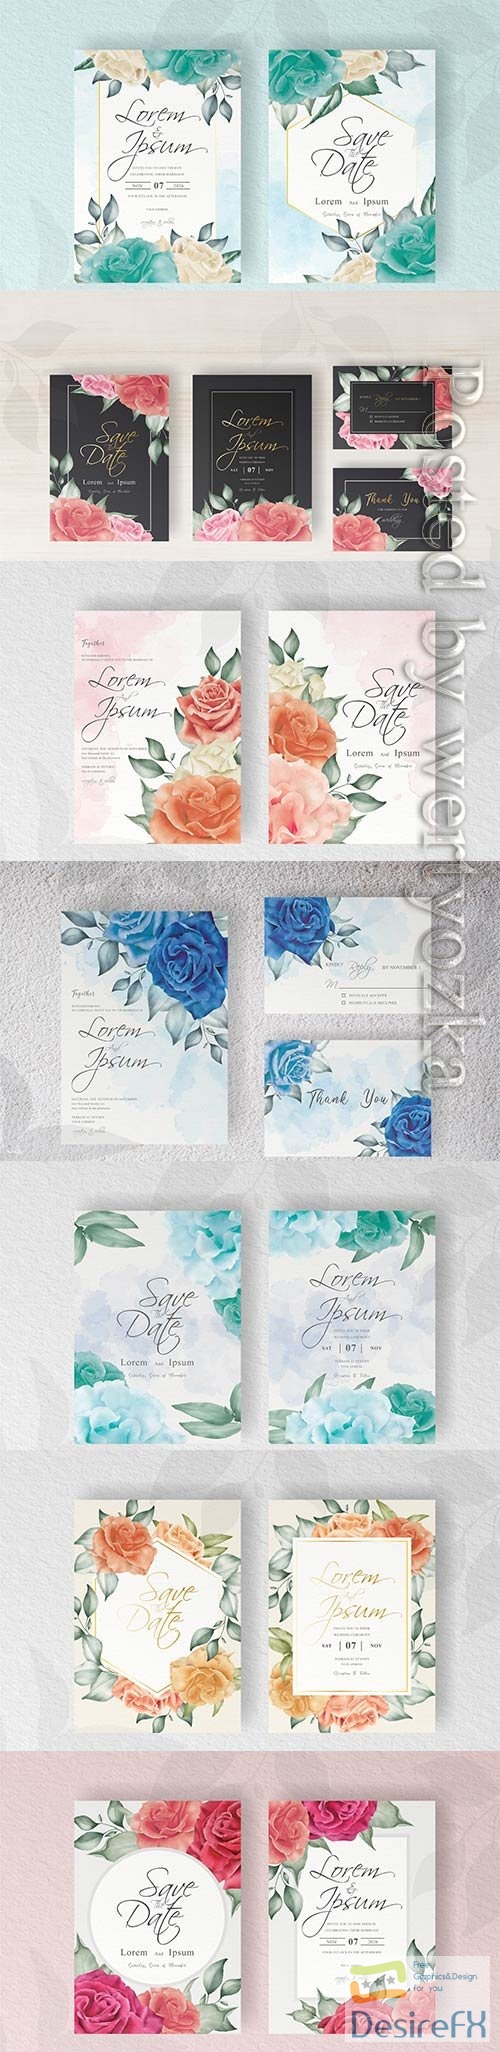 Elegant wedding invitation card template with hand painted floral and leaves